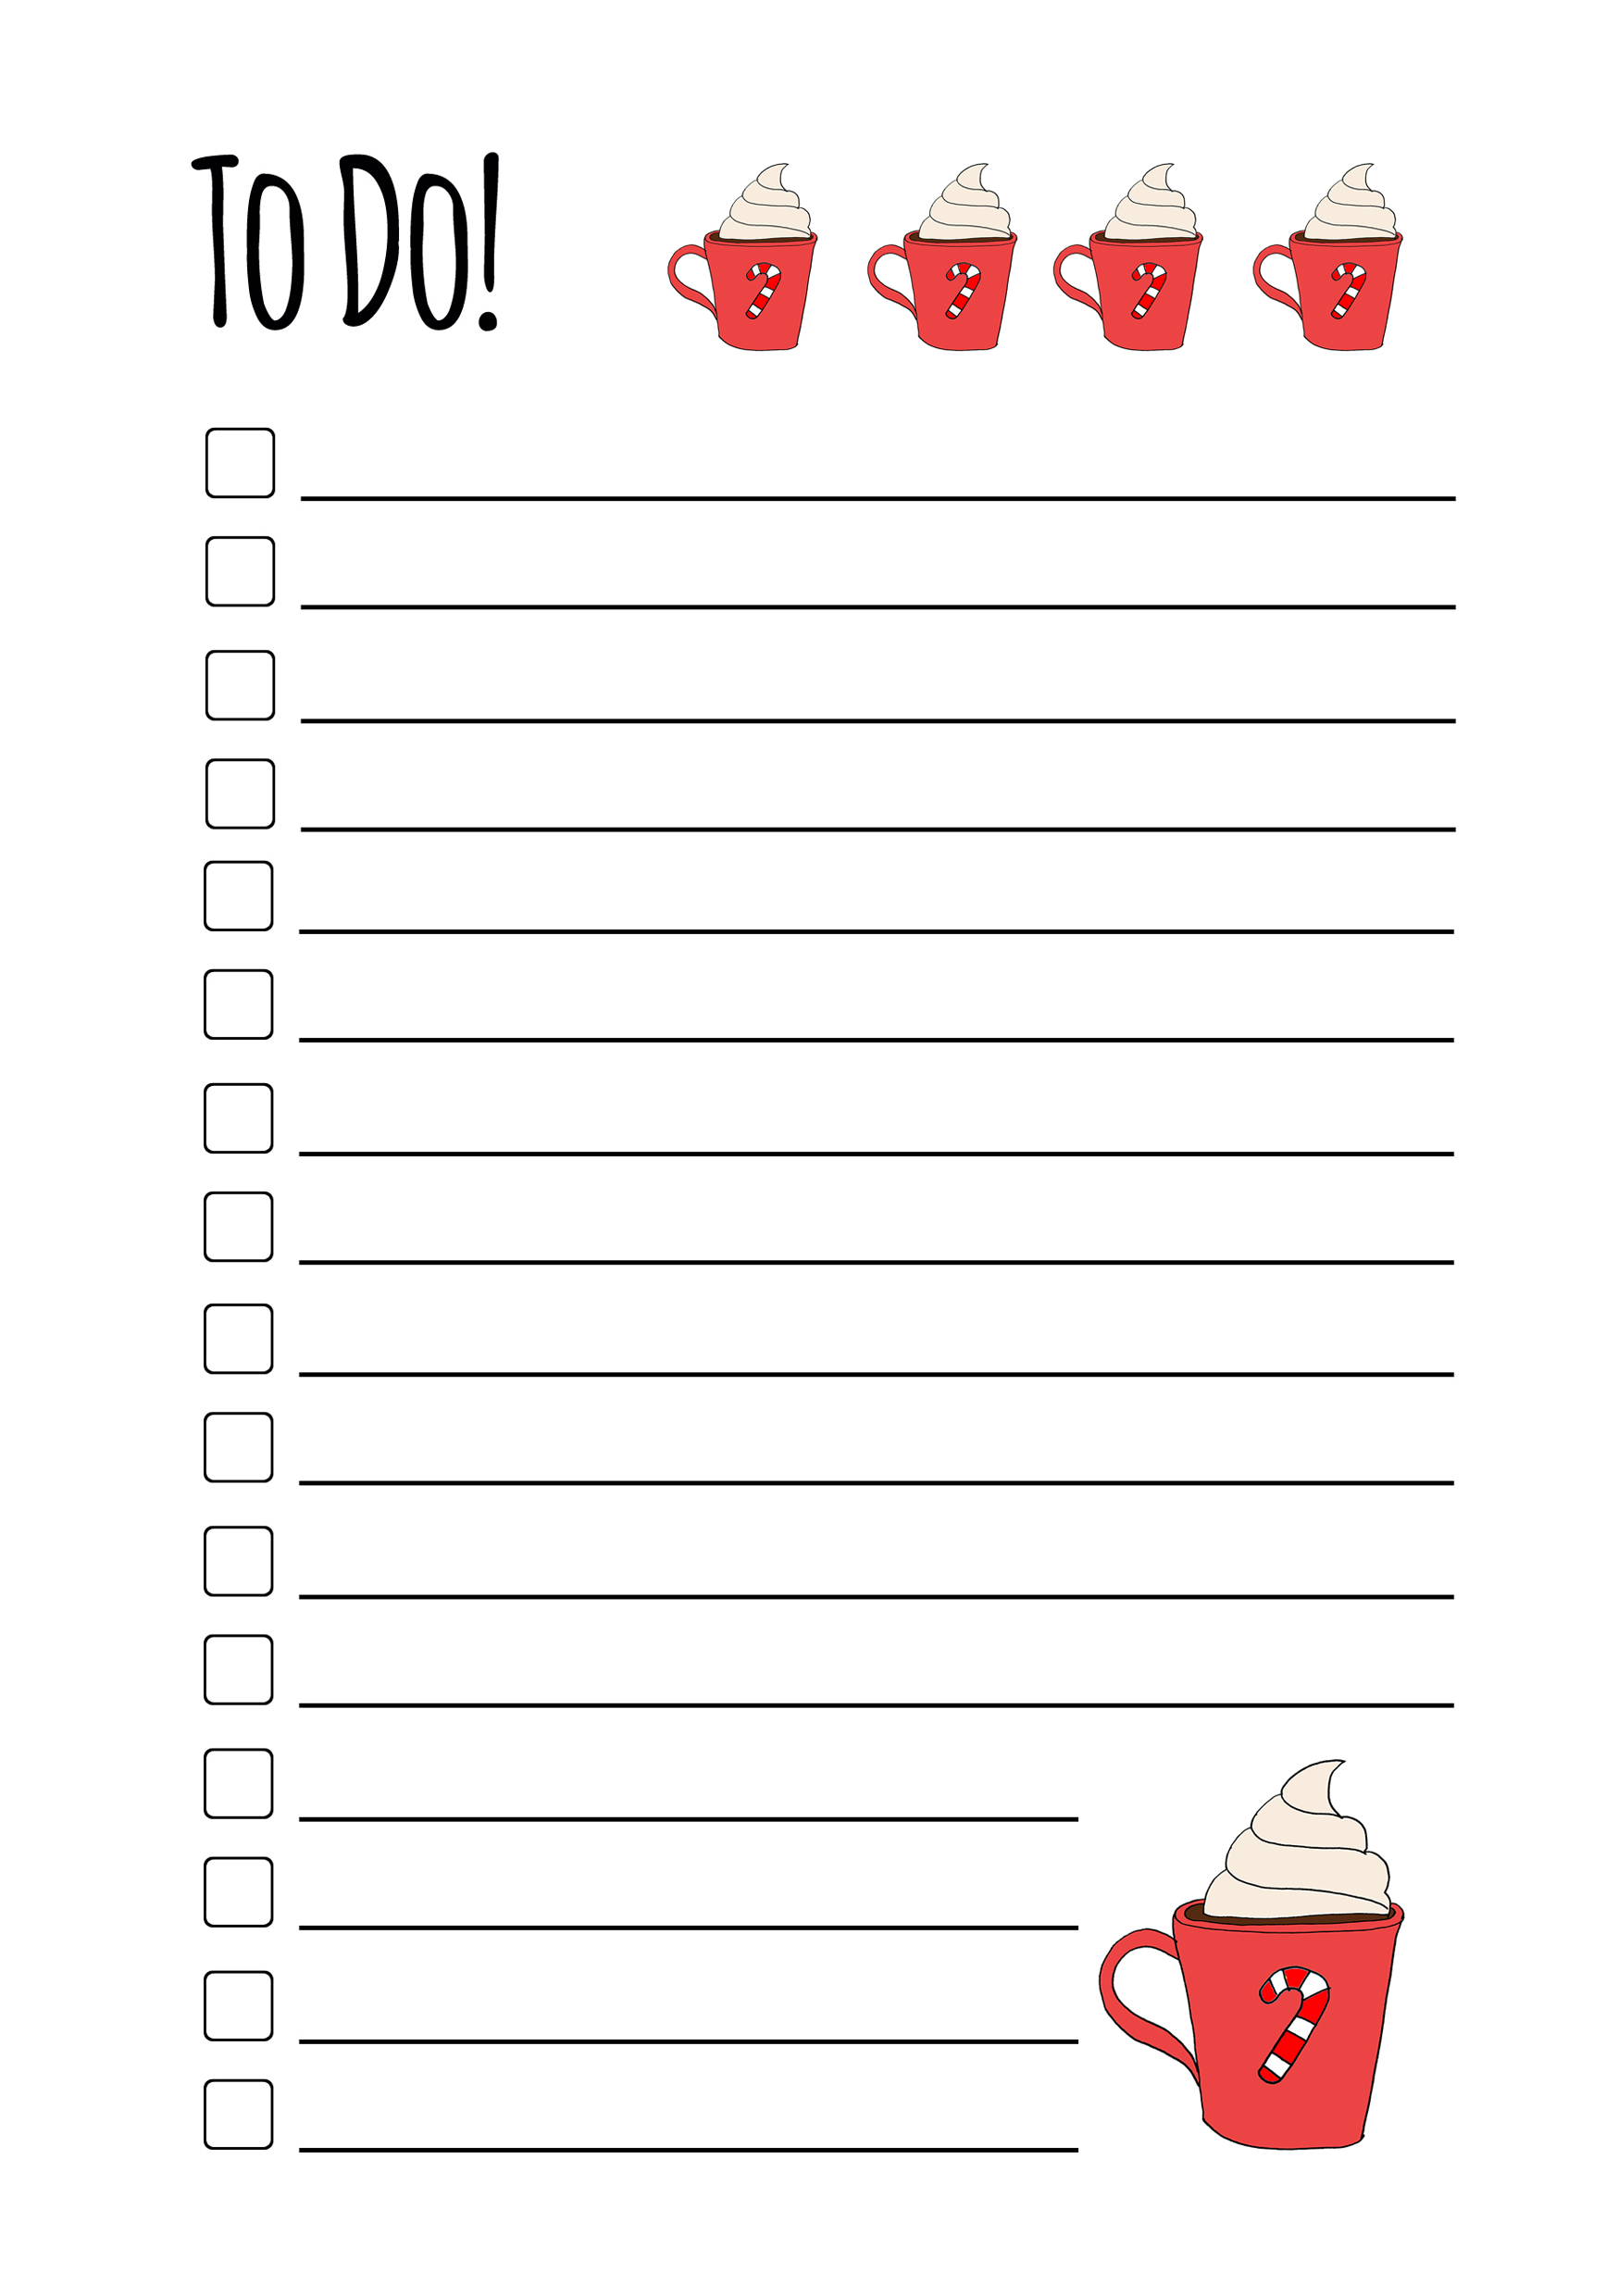 To Do List Christmas Planner Inserts mrsbrimbles